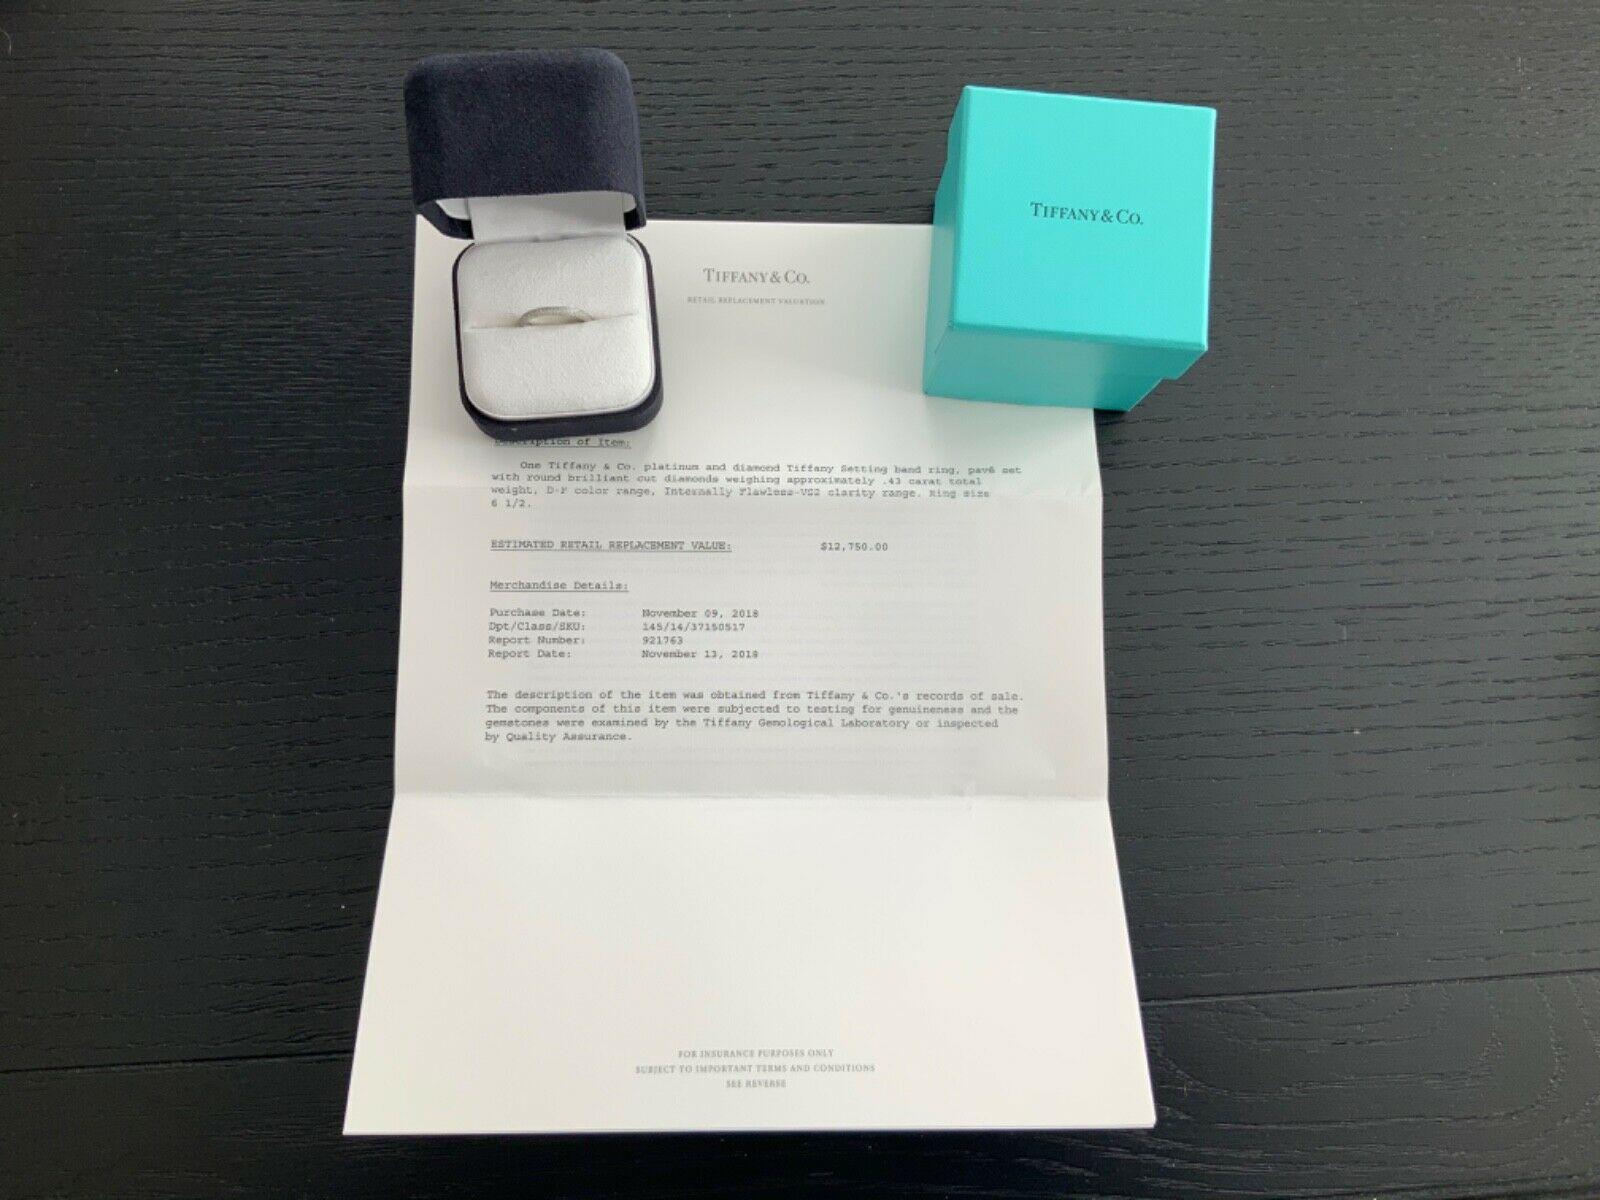 Being offered for your consideration is a BRAND NEW UNWORN Tiffany & Co PAVE platinum diamond ring.  This ring is absolutely breath taking and lights up a room with all of the fire and bling.  The pictures do not do this ring justice.  If you are